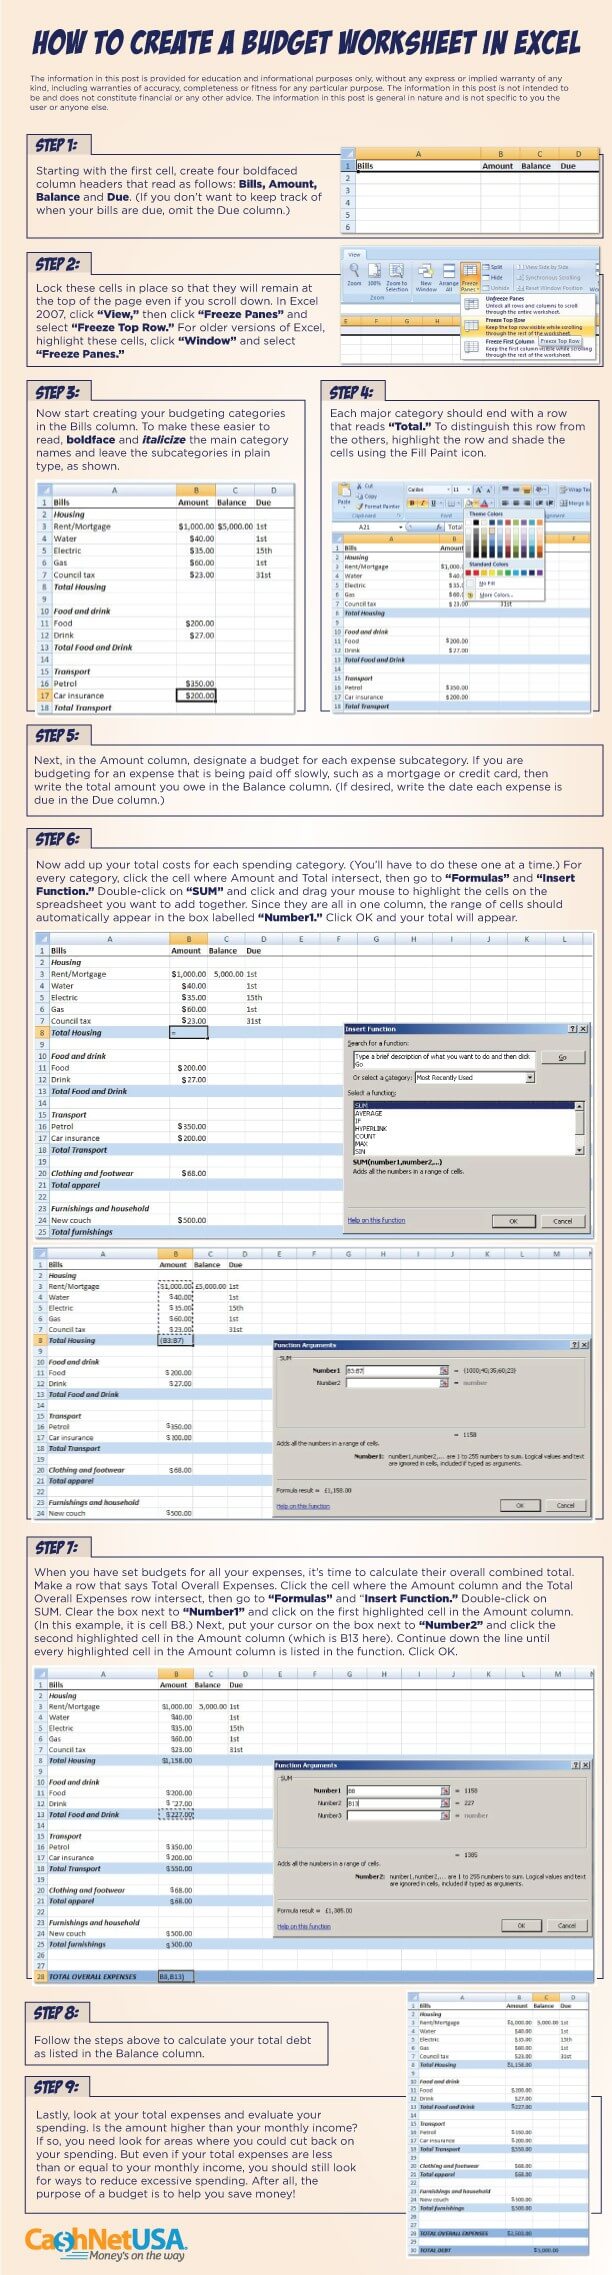 How to Create a Budget Worksheet in Excel